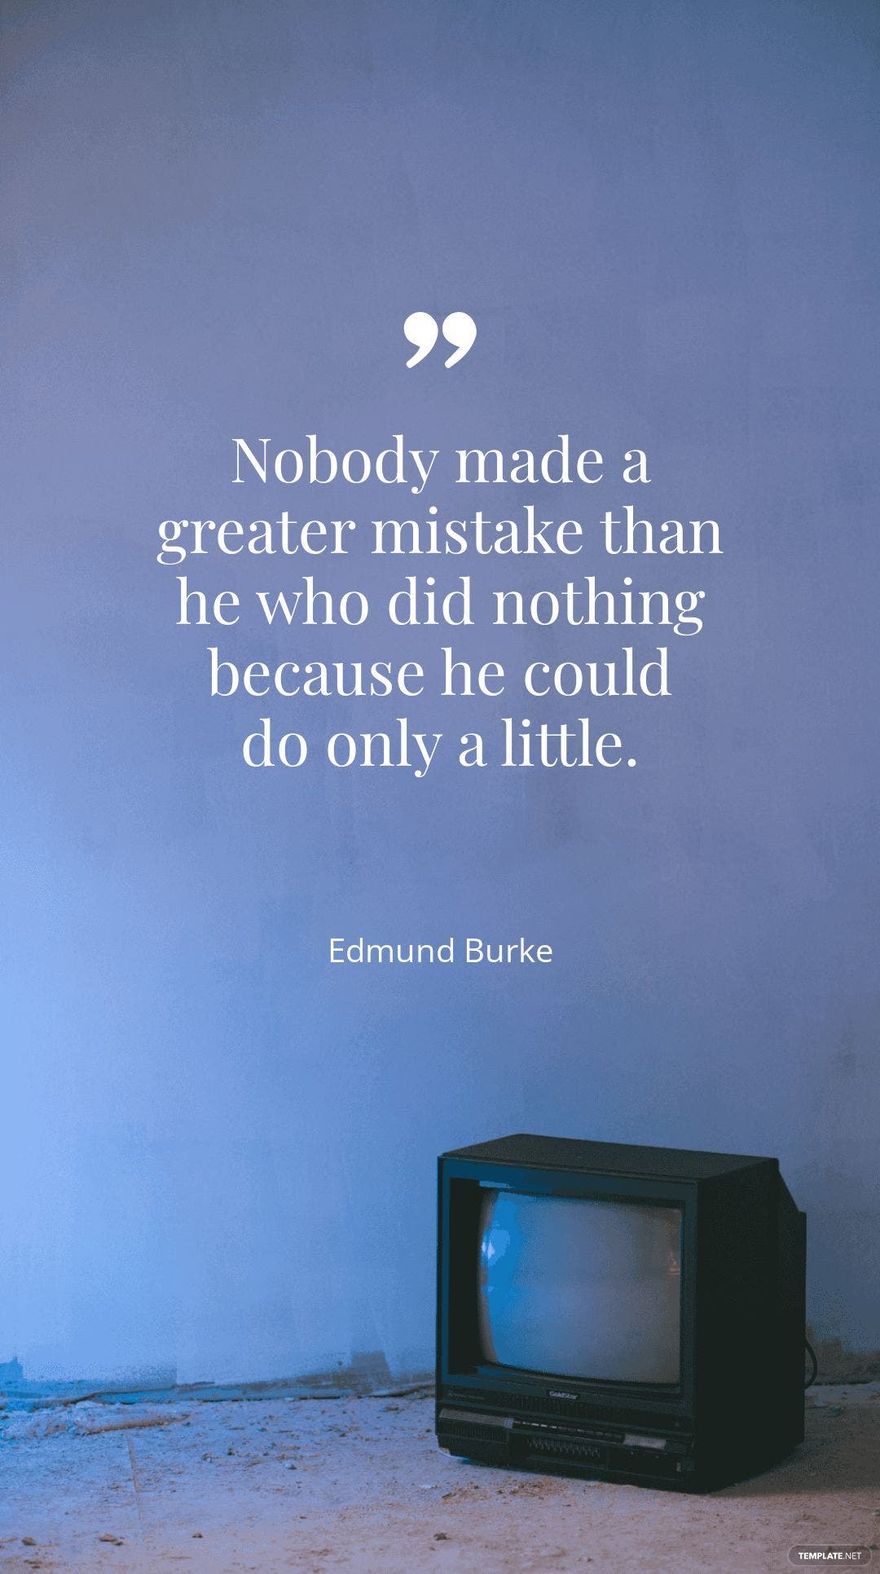 Edmund Burke - "Nobody made a greater mistake than he who did nothing because he could do only a little."